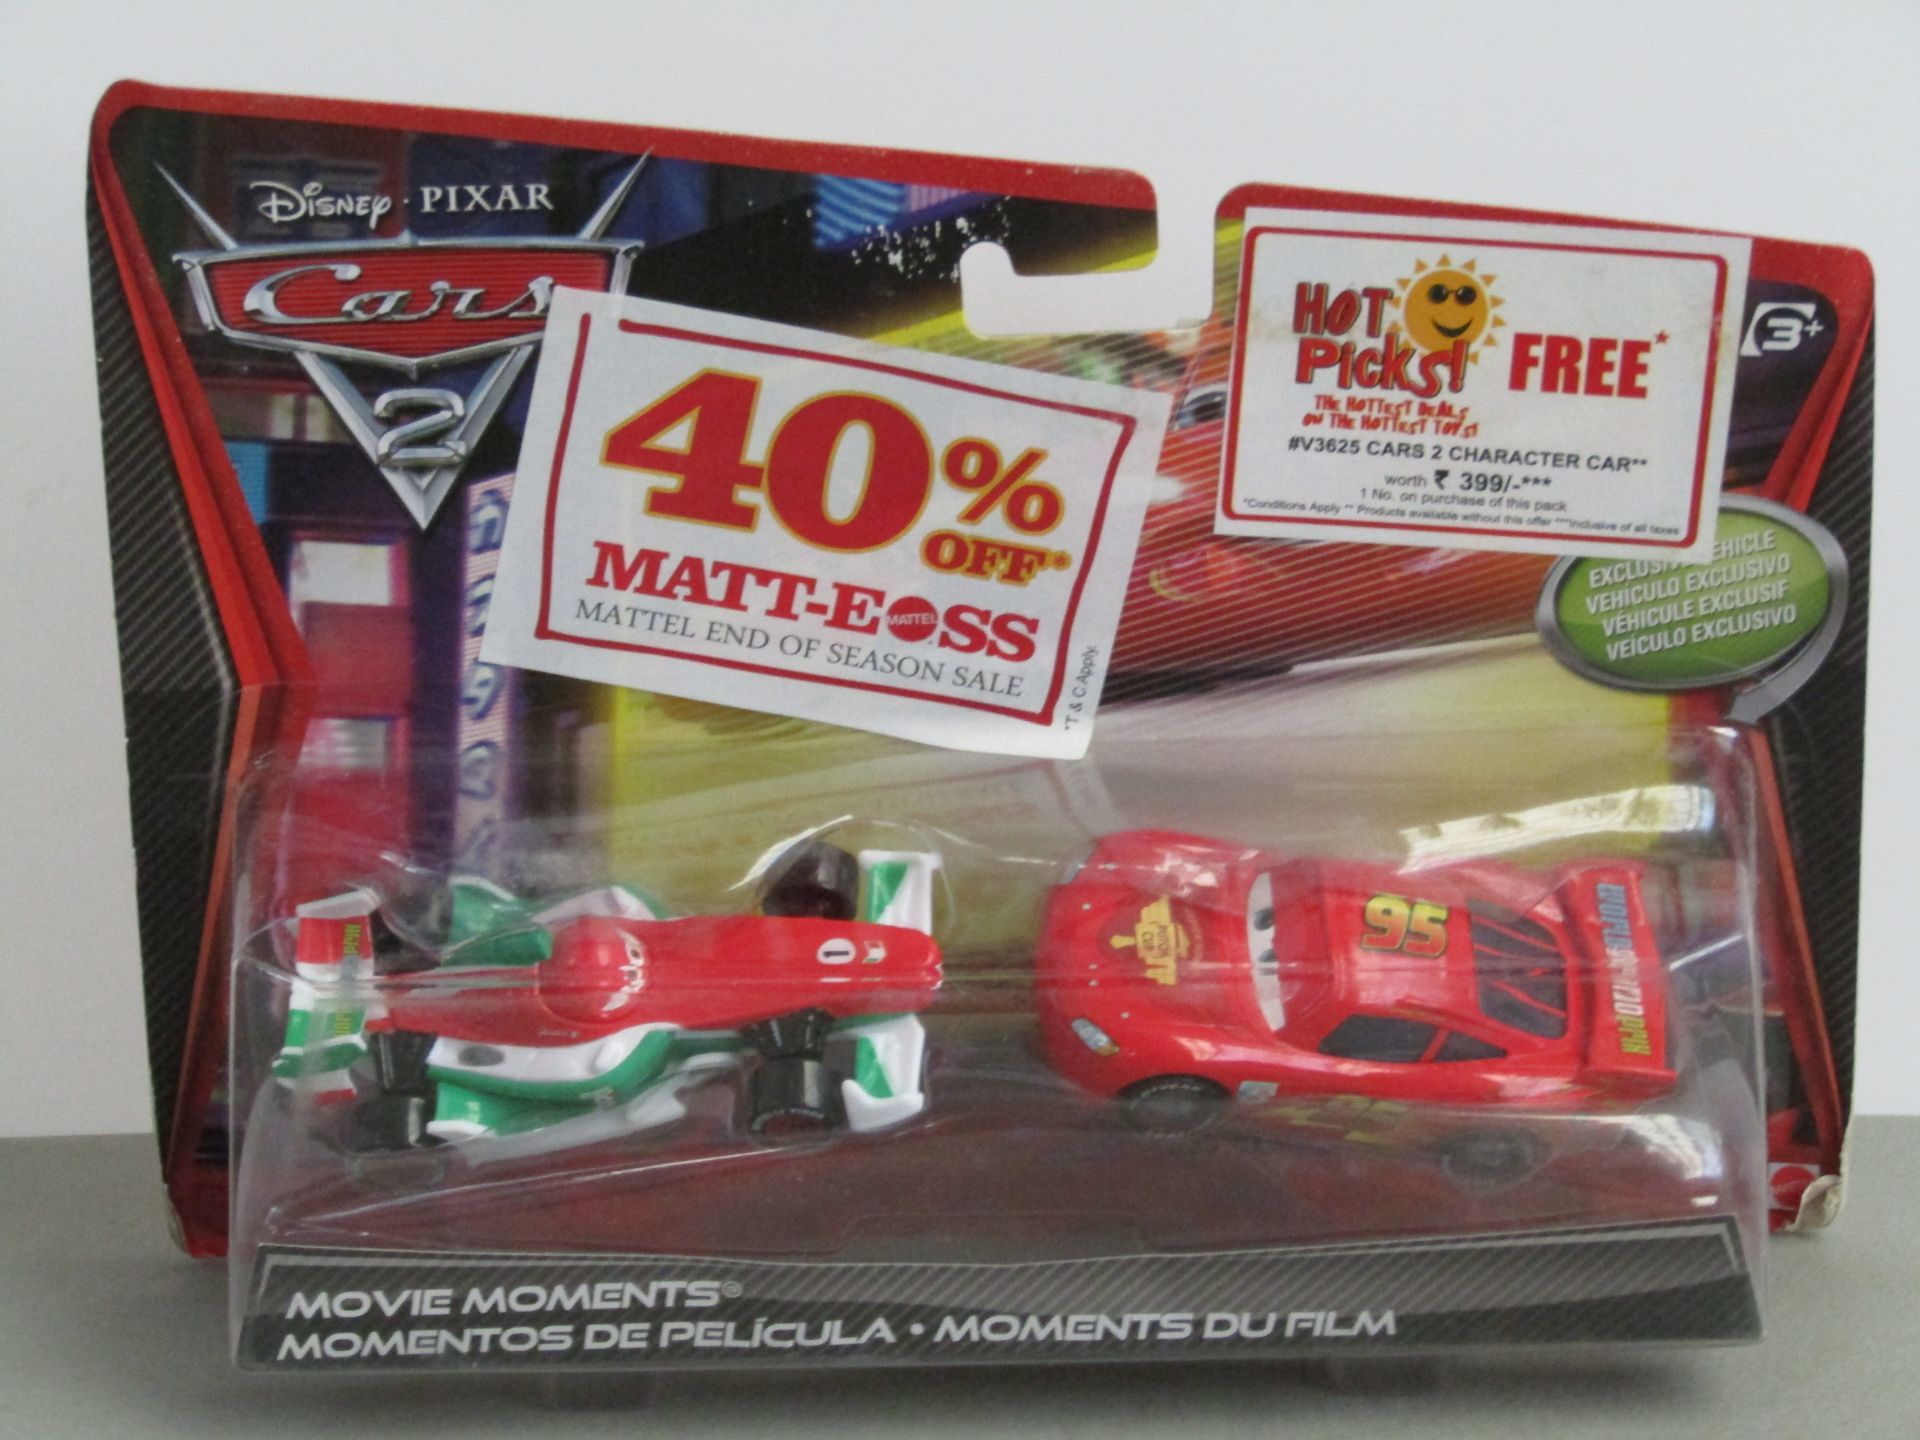 Disney Pixar Cars 2 Movie Moments Set of 2x Cars. New In Packaging.